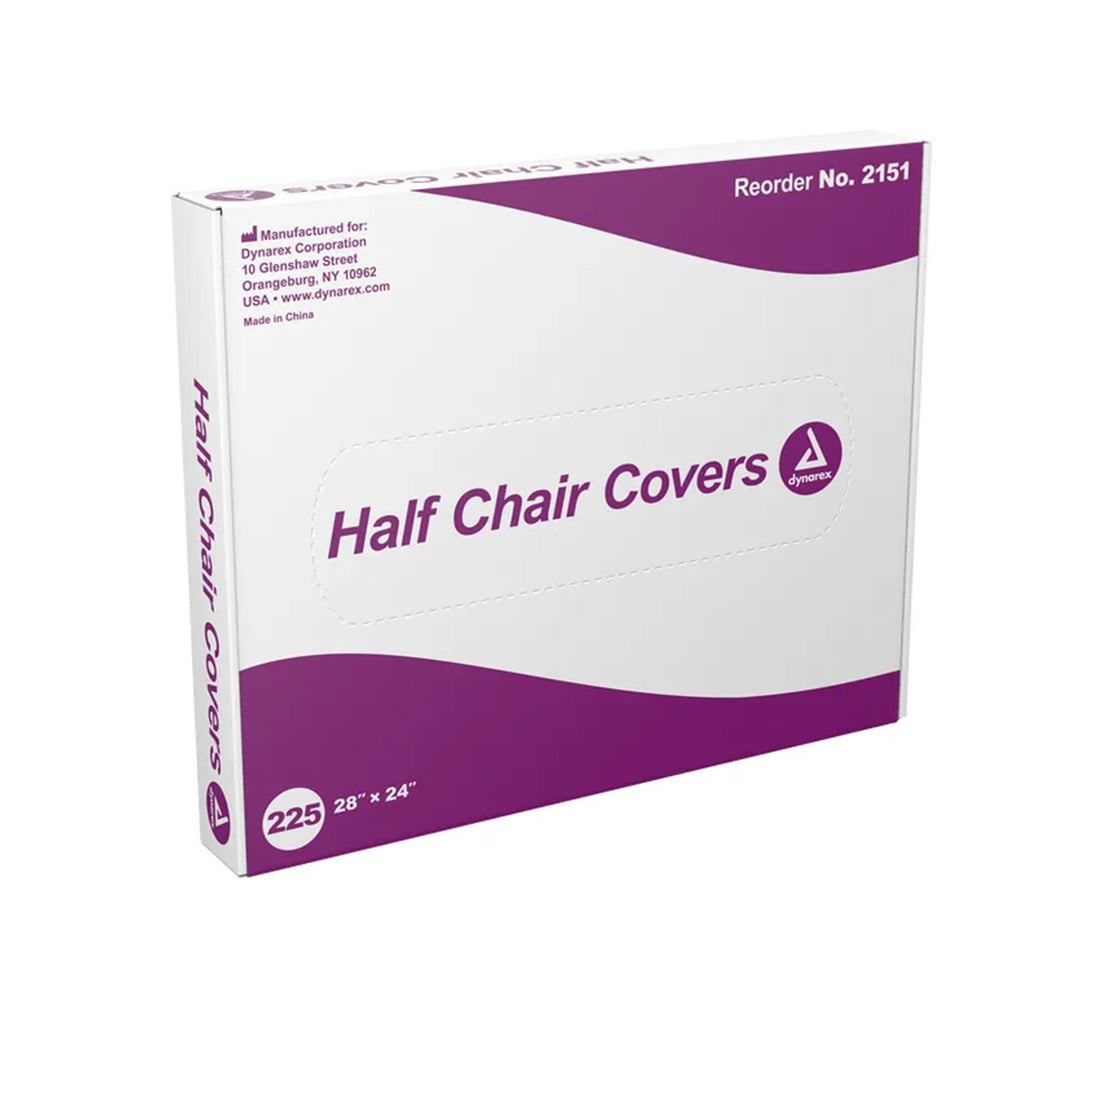 Half Chair Cover